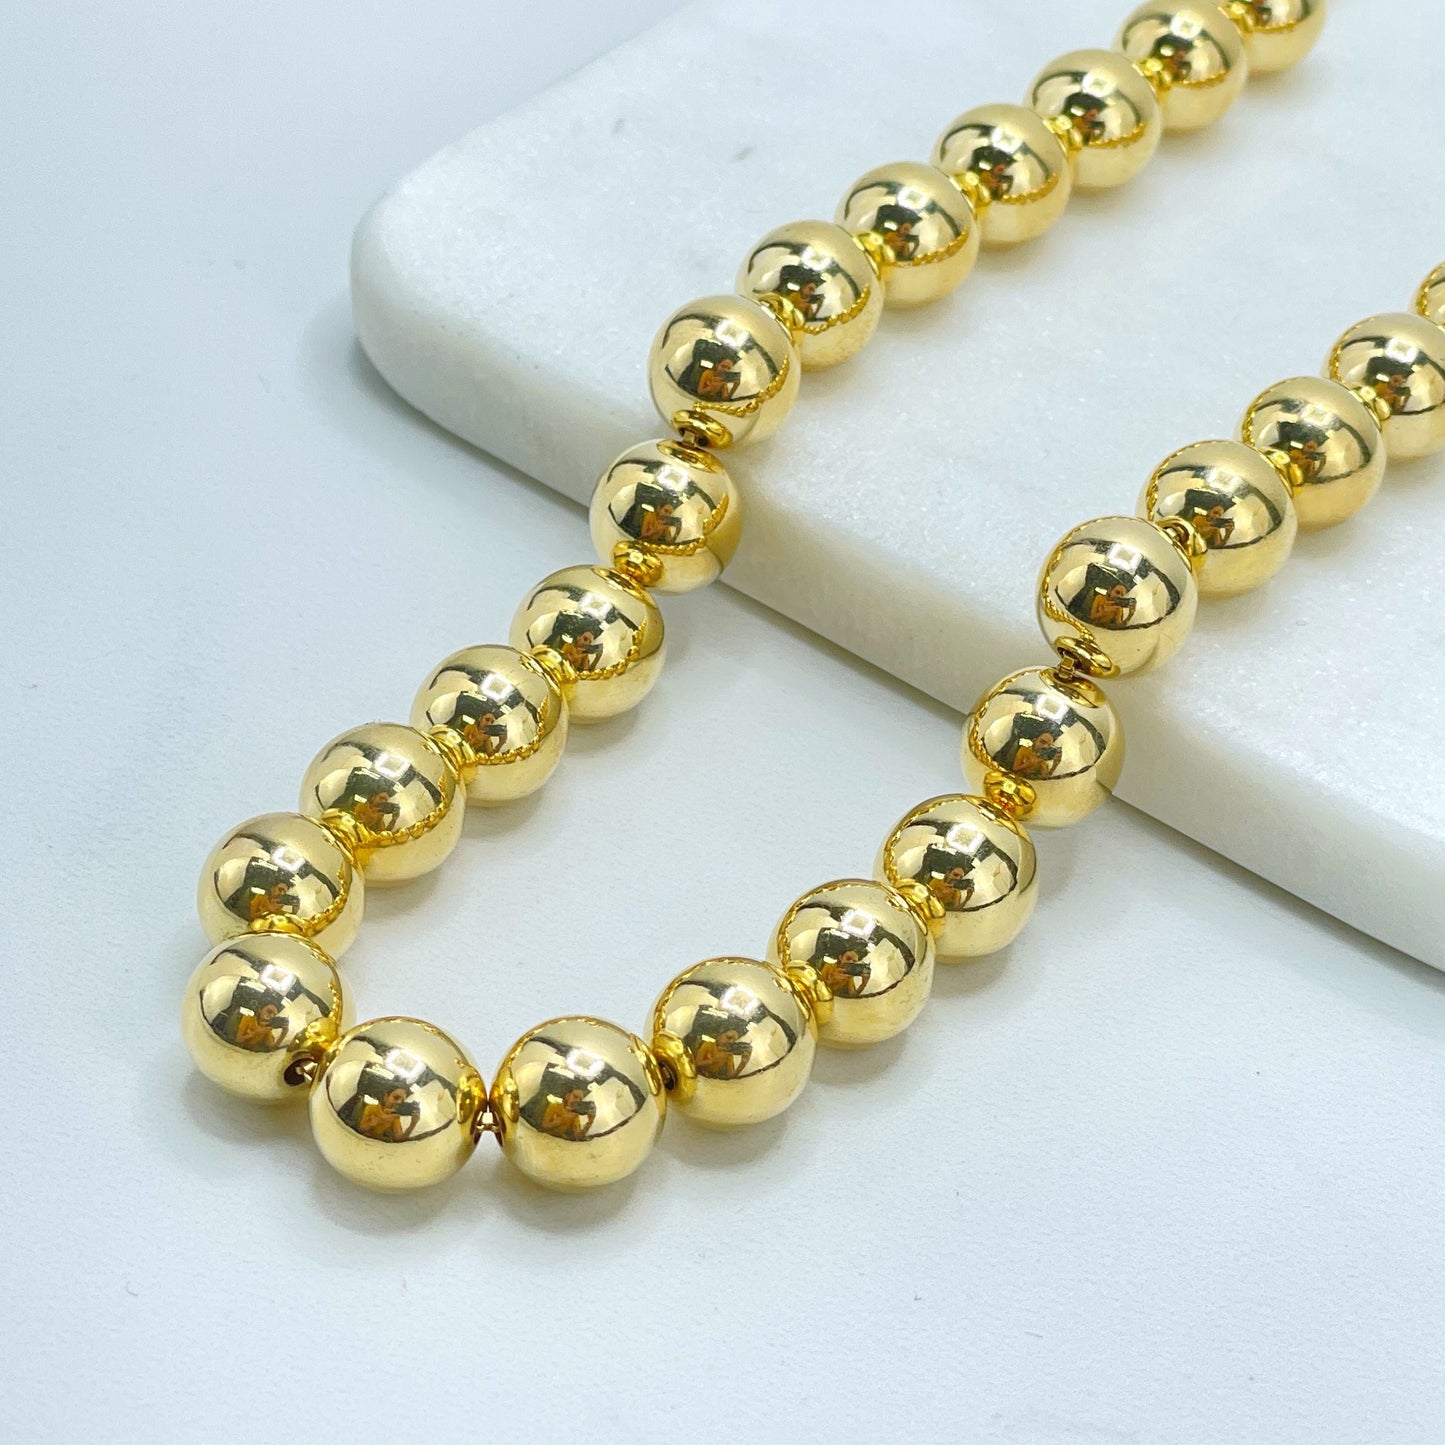 18k Gold Filled 1mm Box Chain, 16 inches Beaded Necklace Wholesale Jewelry Supplies